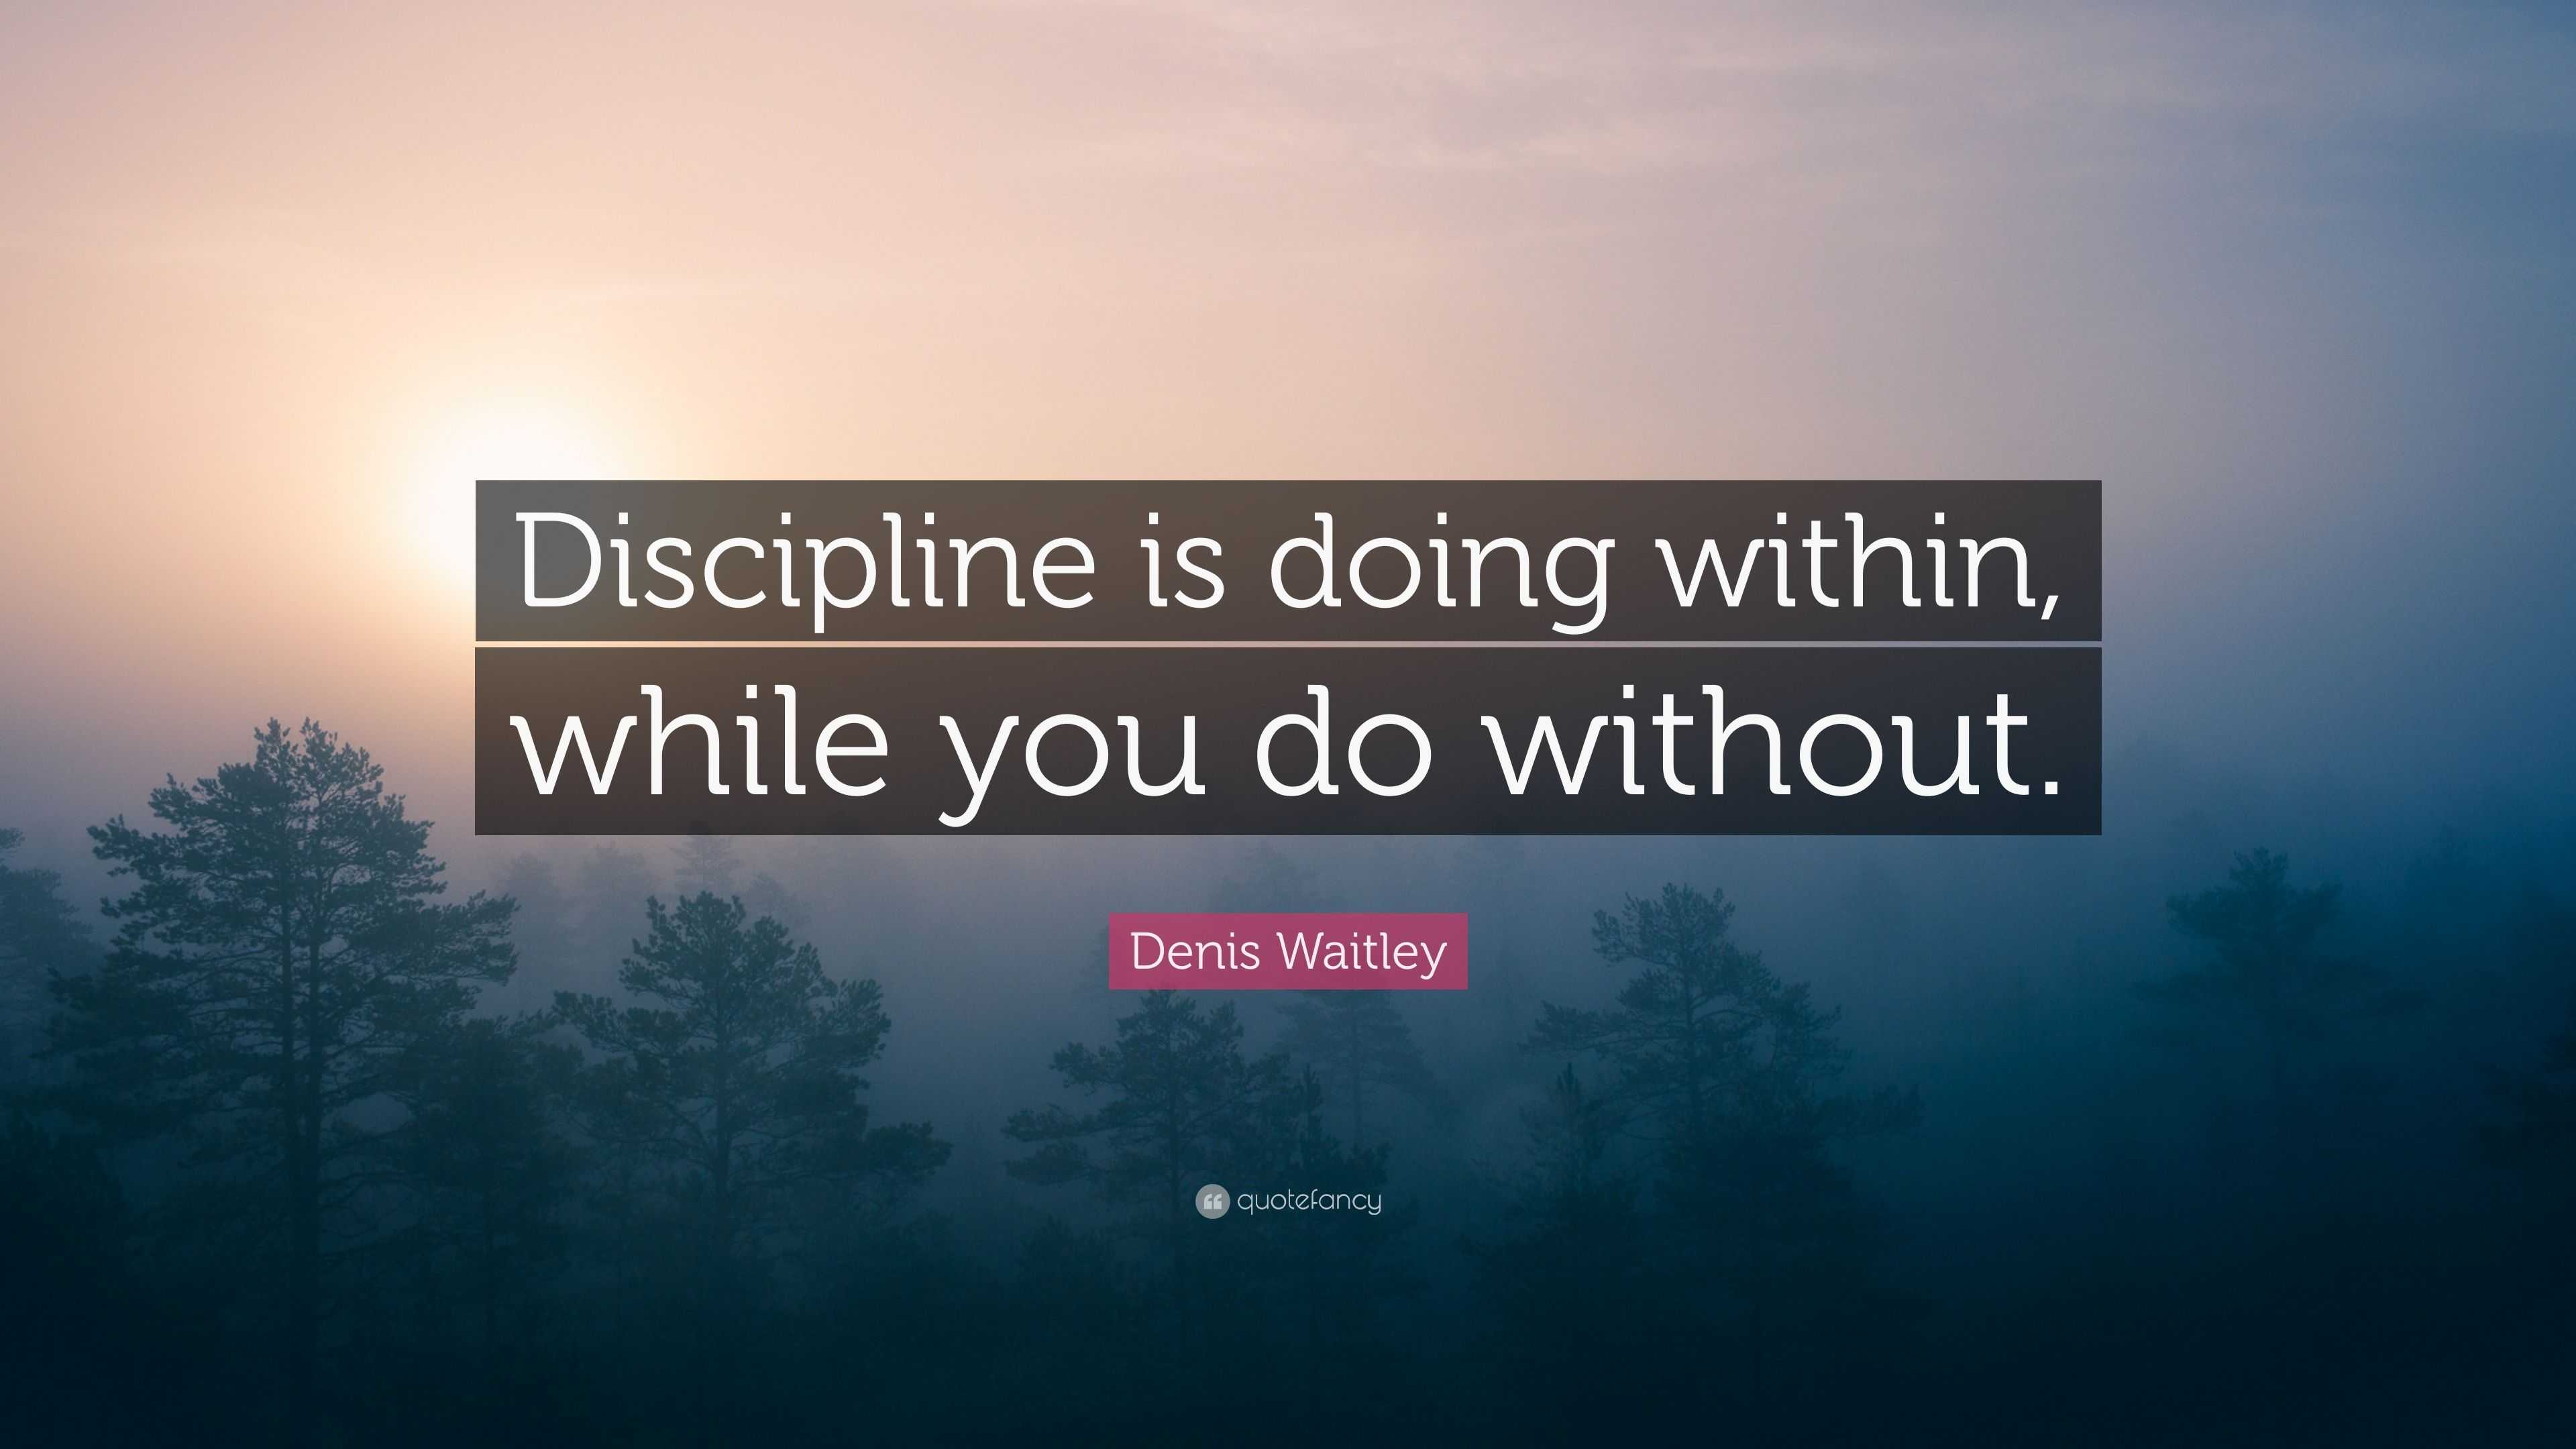 Denis Waitley Quote: “Discipline is doing within, while you do without.”